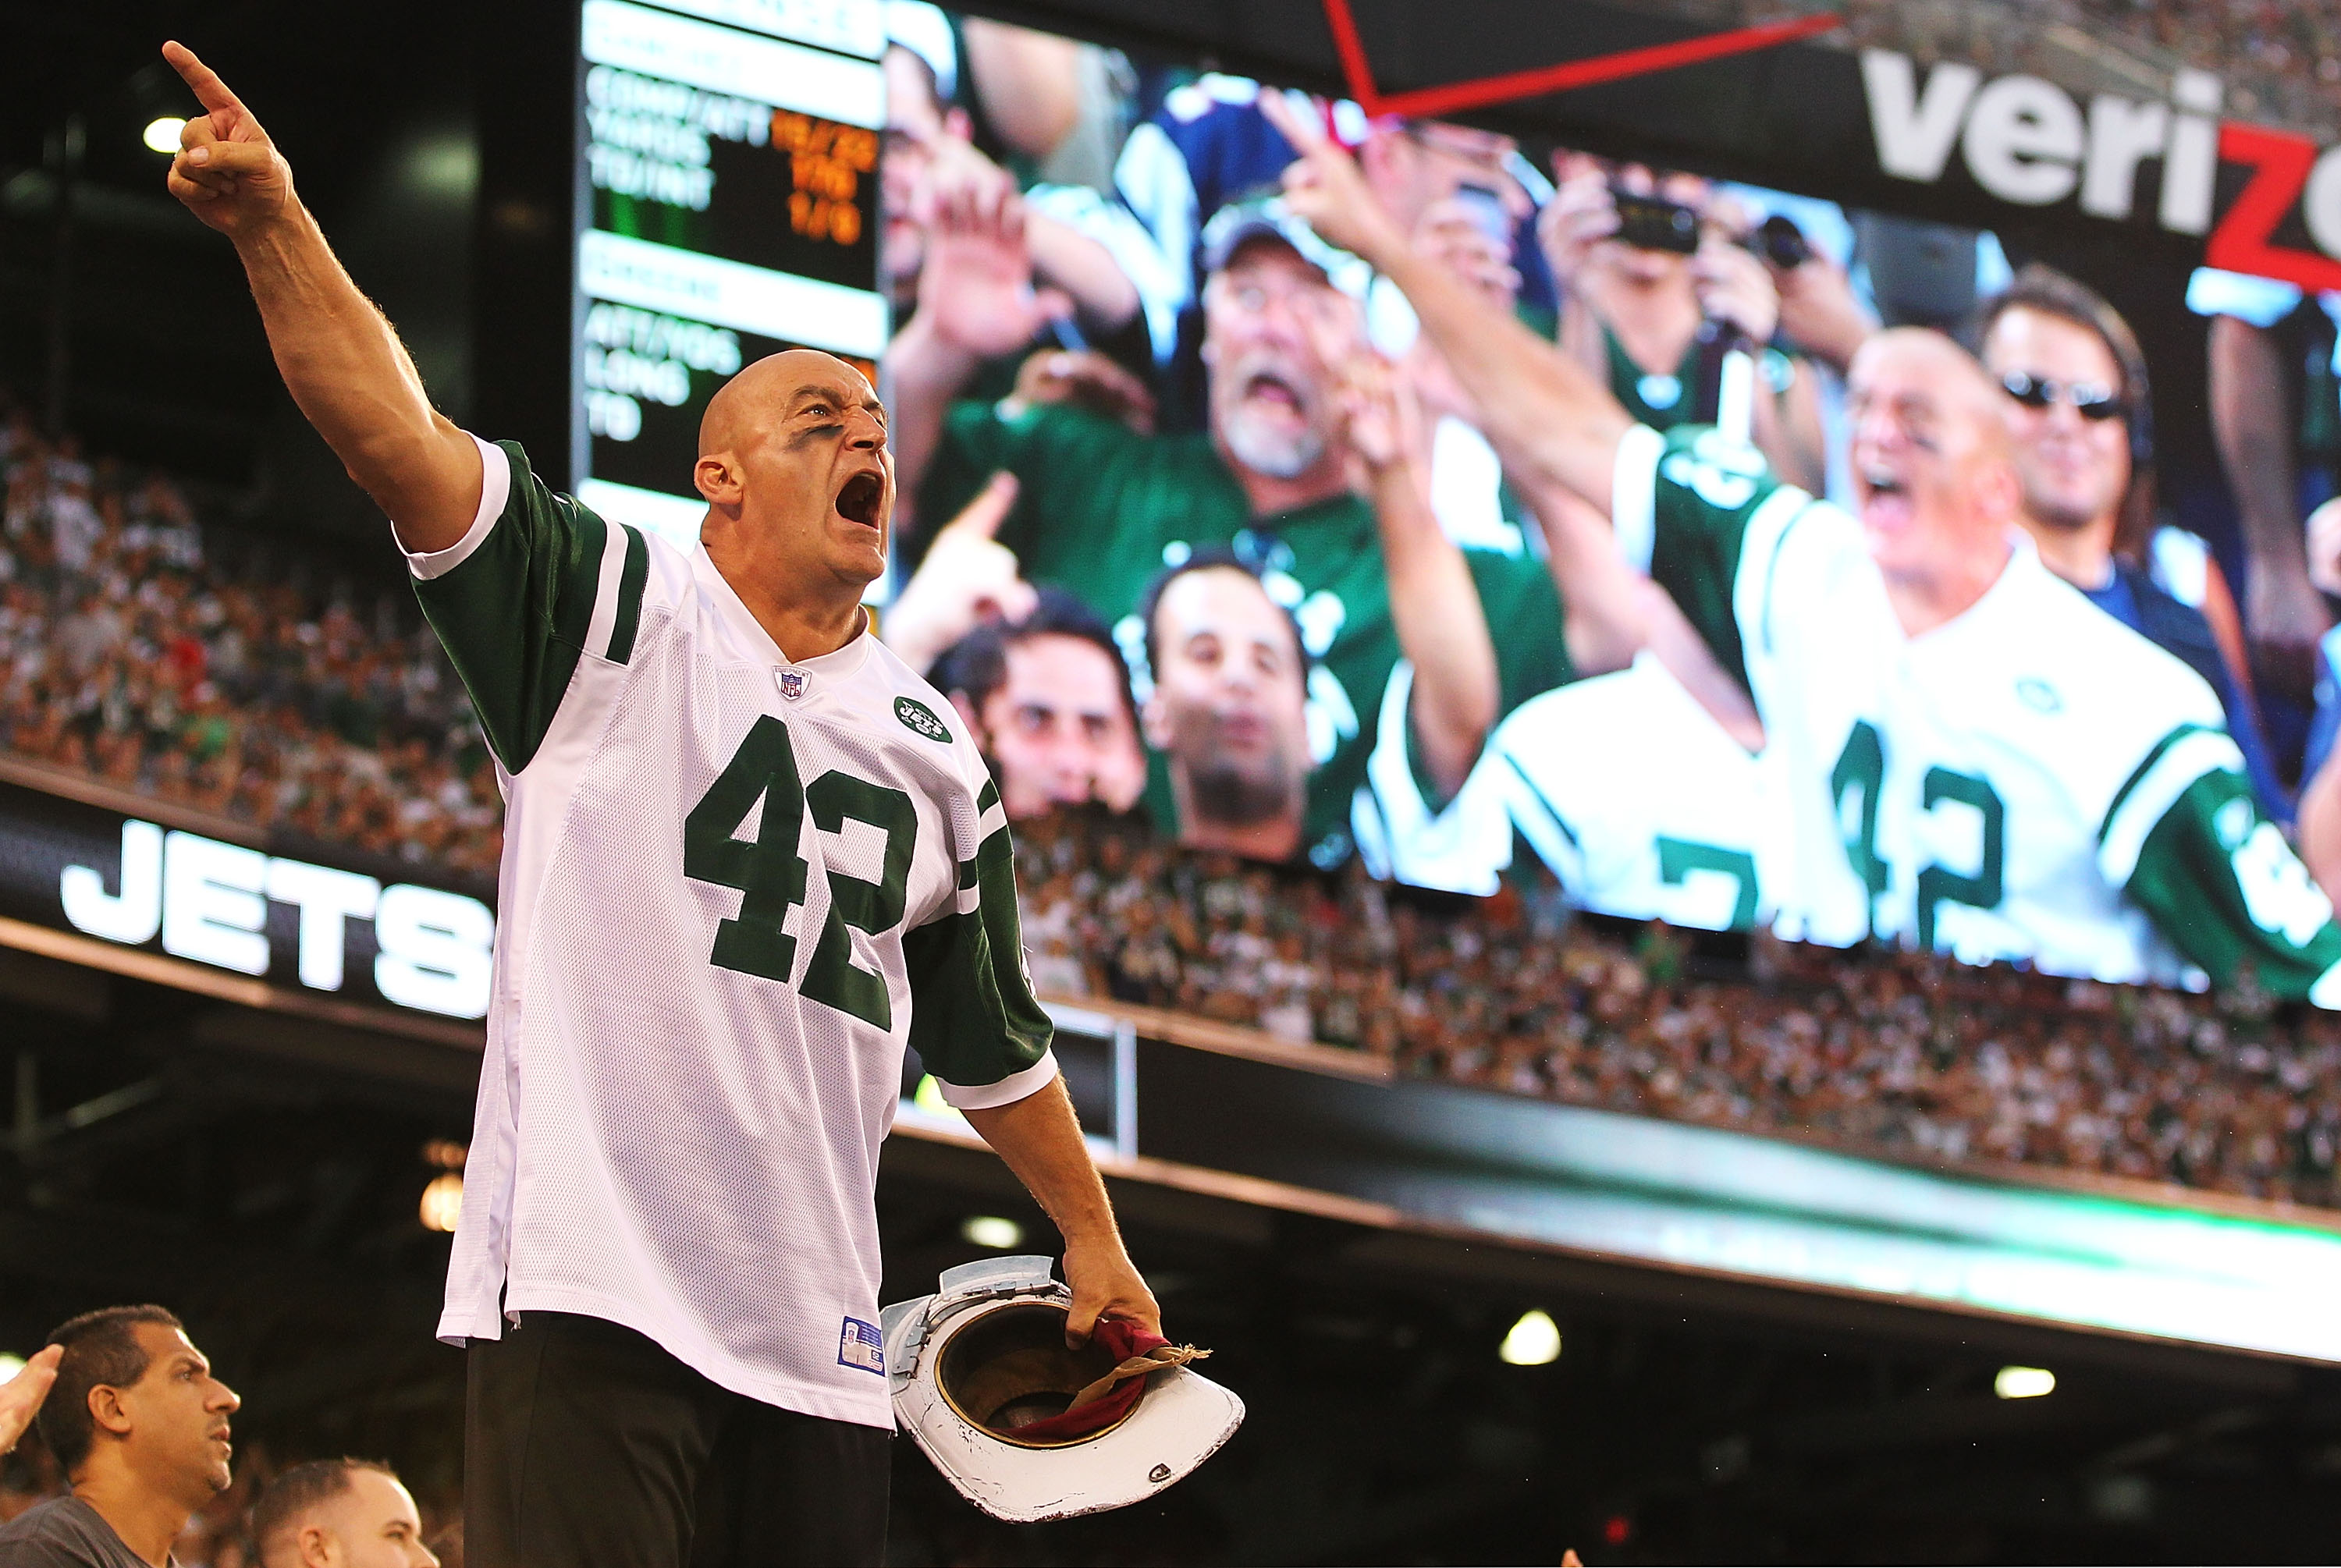 EAST RUTHERFORD, NJ - SEPTEMBER 19:  New York Jets fan Fireman Ed Anzalone leads the crowd in a cheer against the New England Patriots during their  game on September 19, 2010 at the New Meadowlands Stadium  in East Rutherford, New Jersey.  (Photo by Al B